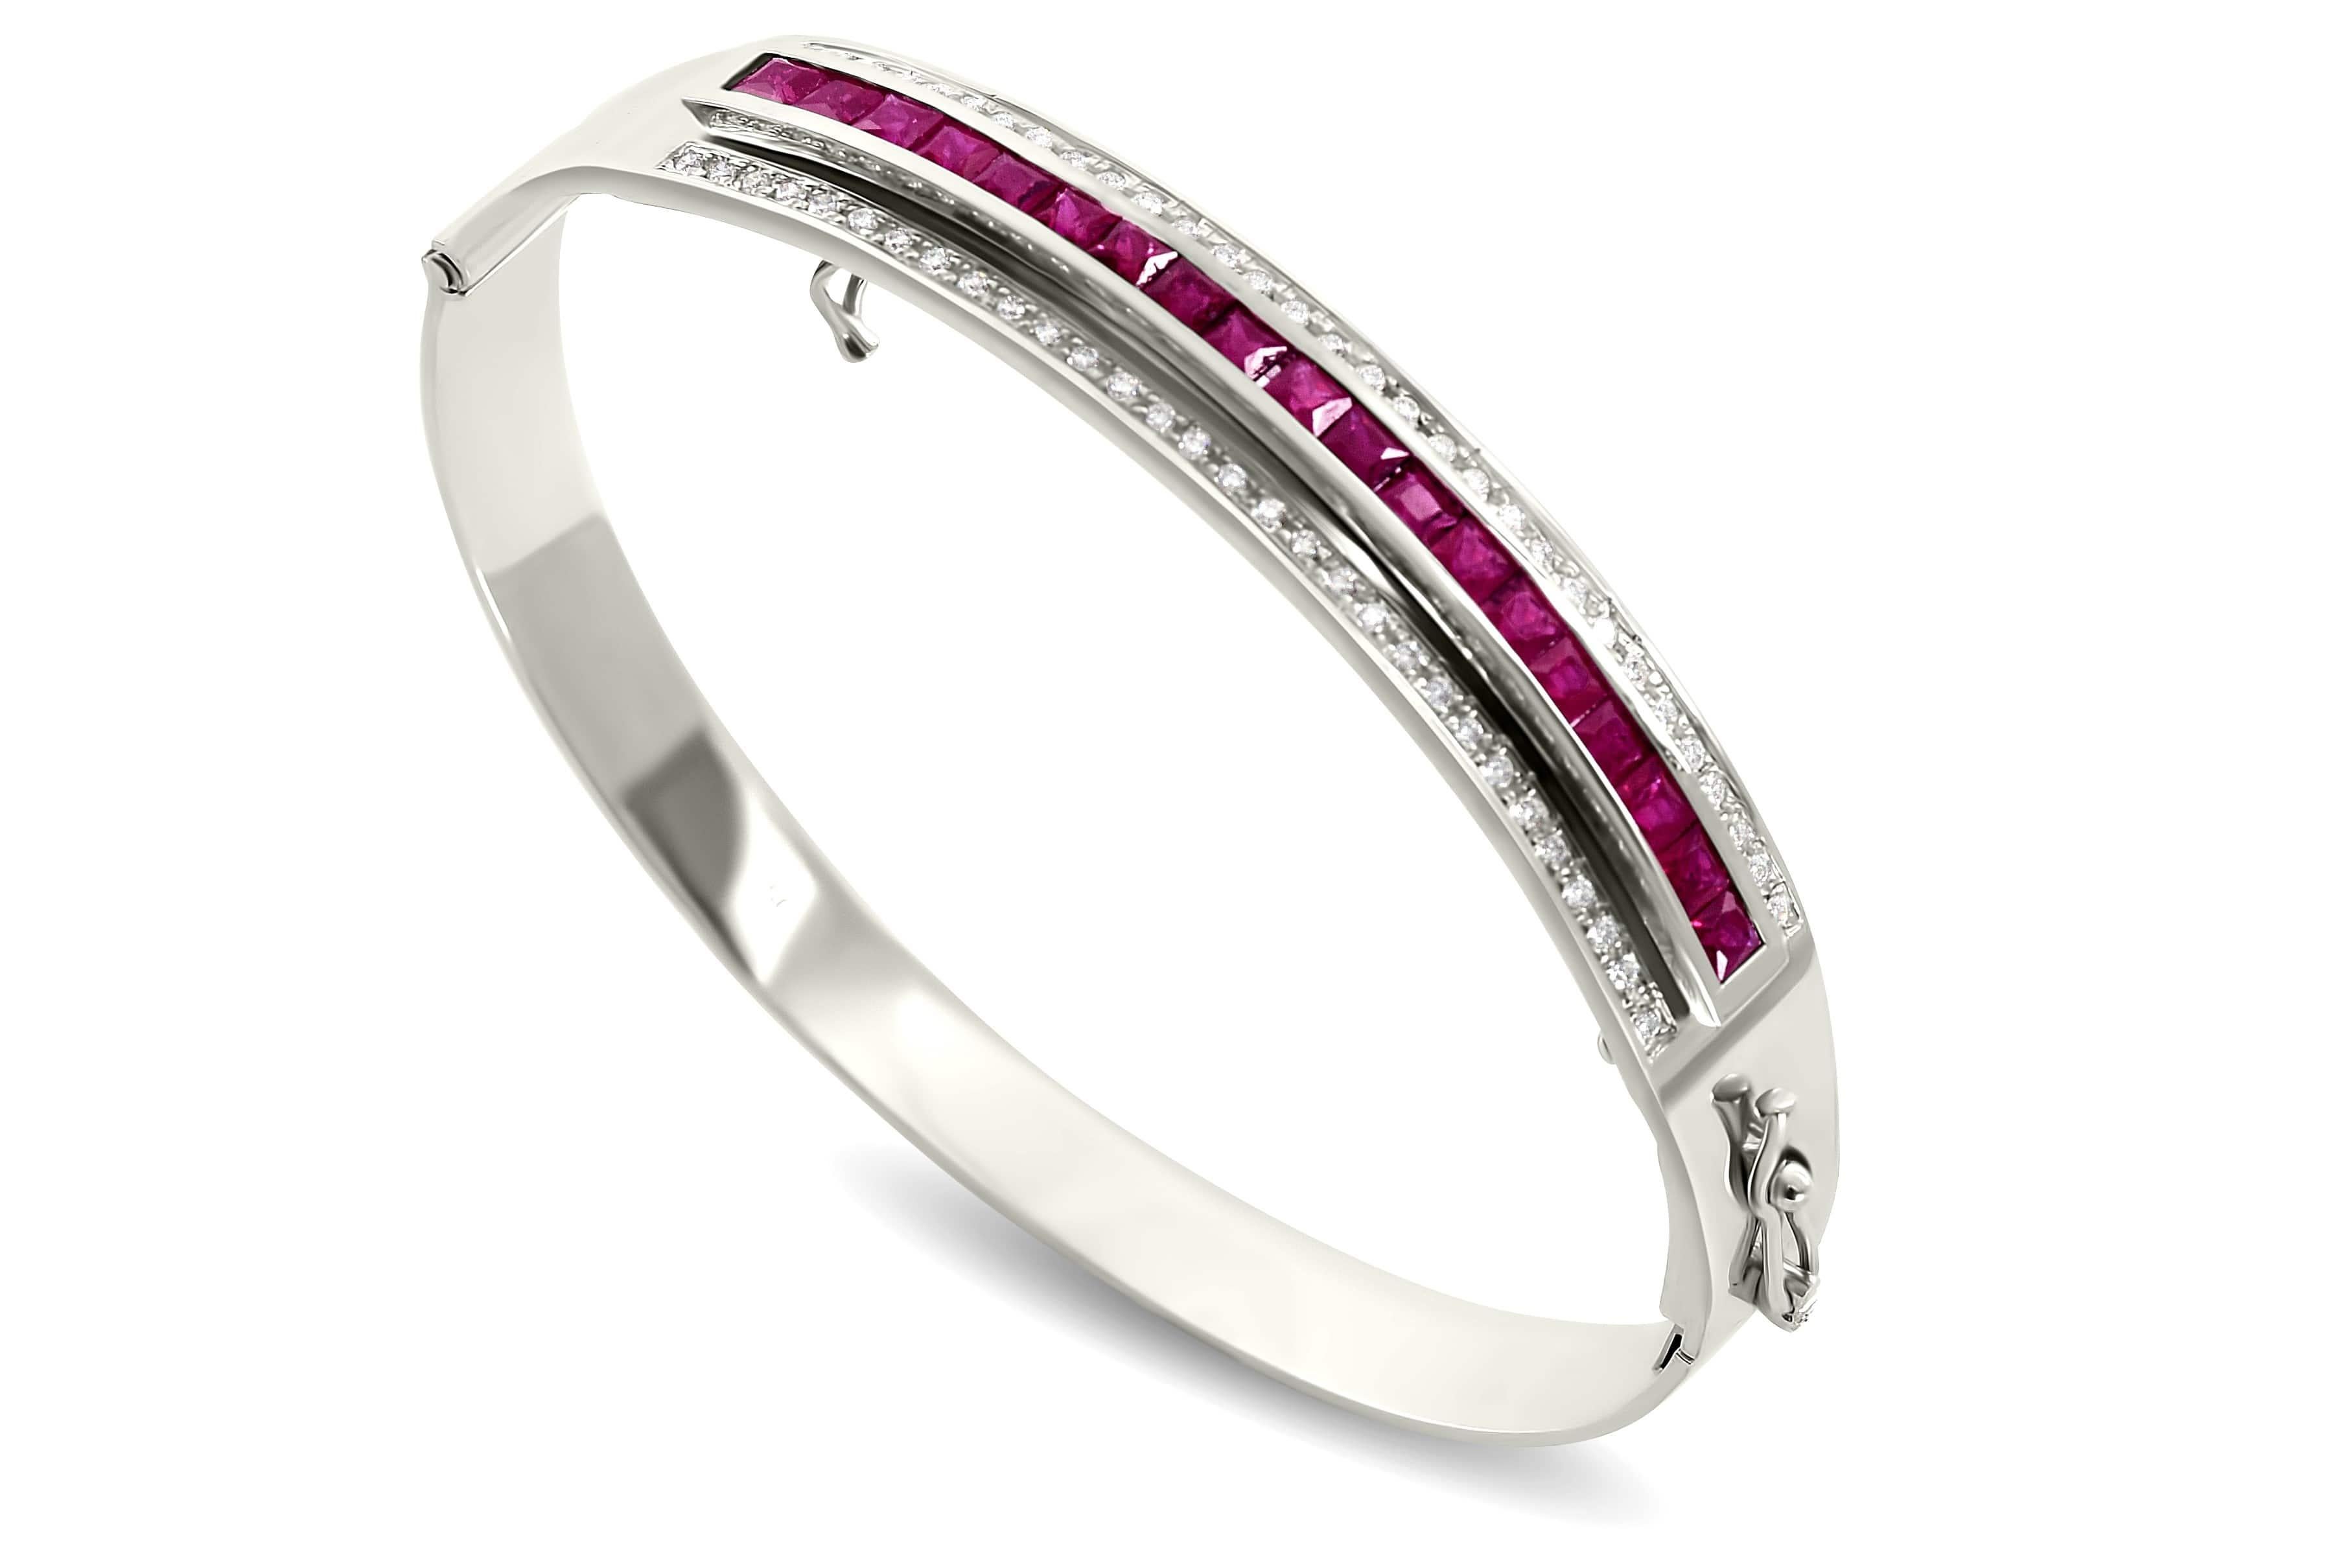 This decadent piece features the highest quality brilliant cut diamonds set in solid platinum in an elegant hinged oval bangle. The featured gemstone insert is interchangeable, set with magnificent hand selected, calibrated rubies, tsavorites and